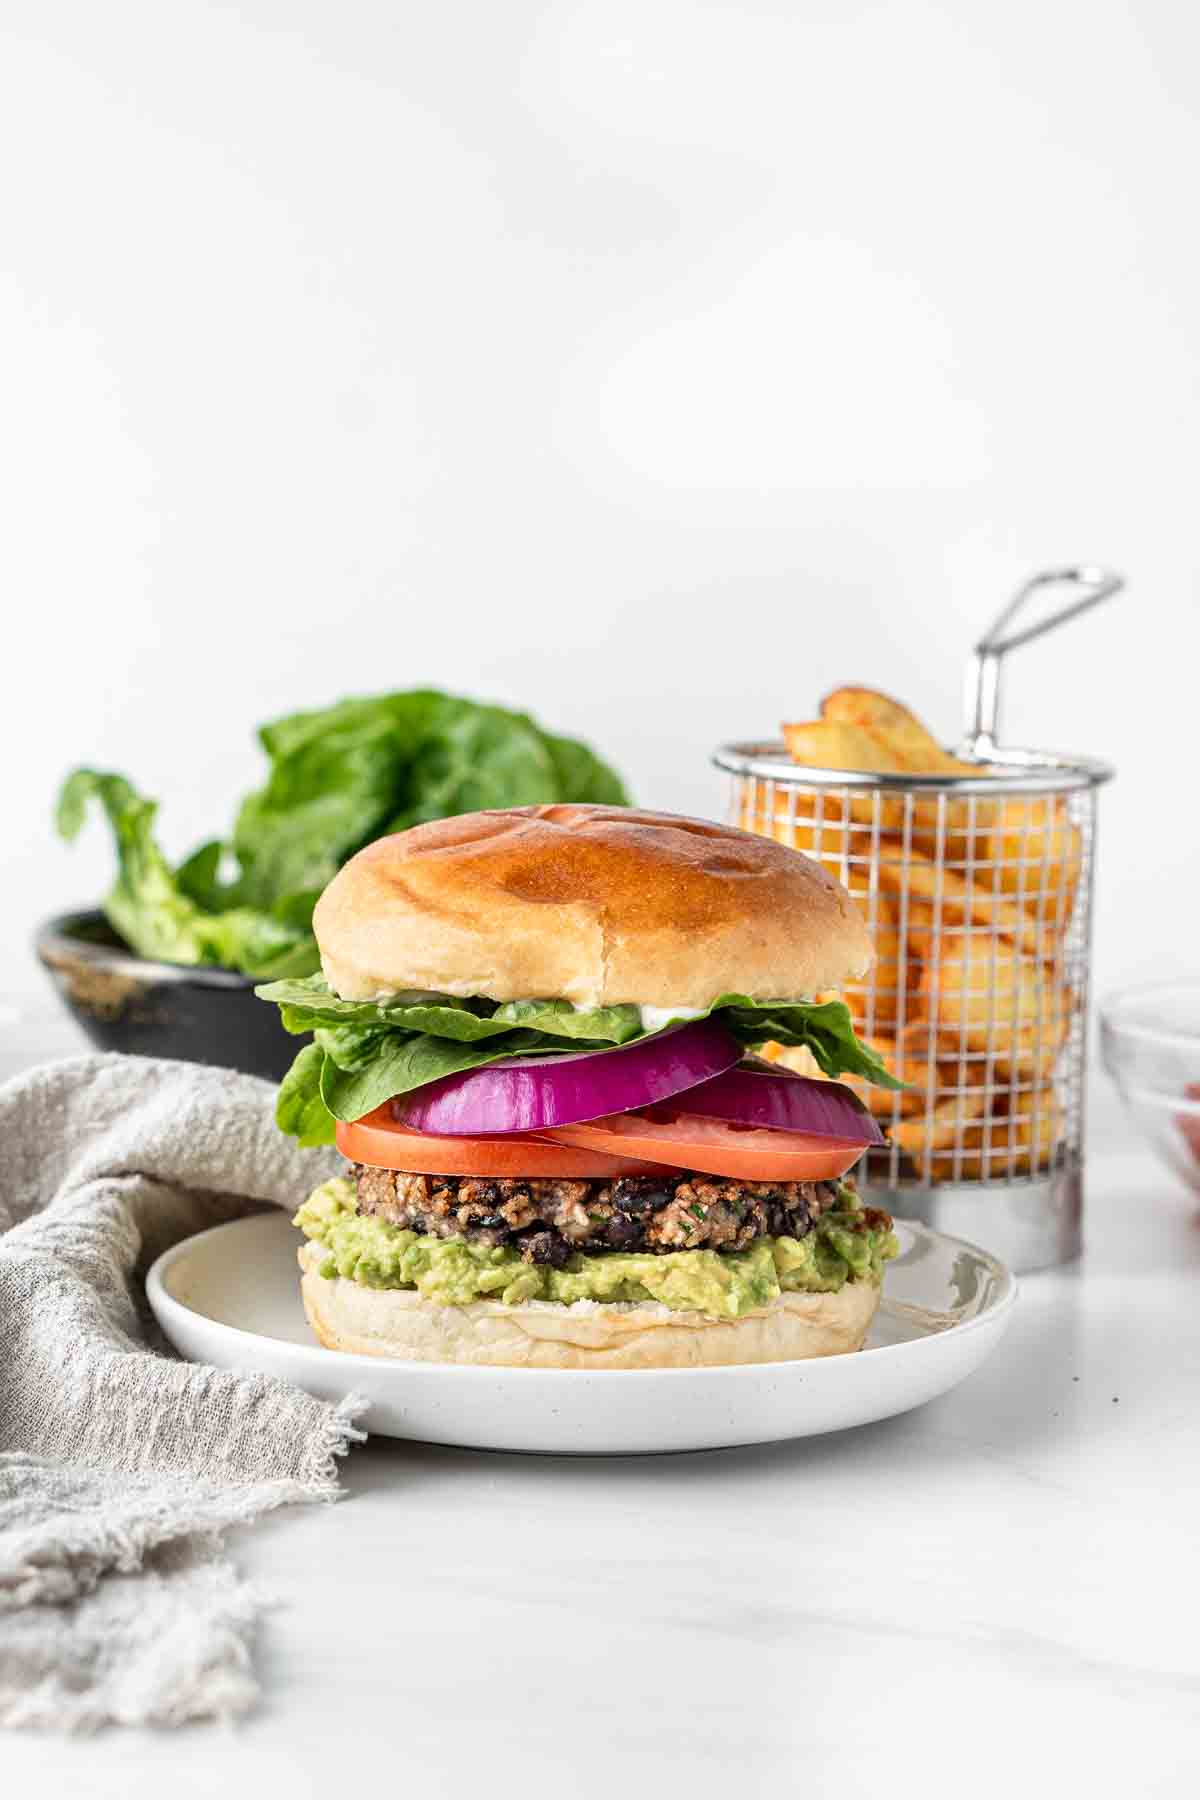 Vegan black bean burger on a plate with chips and salad in the background.